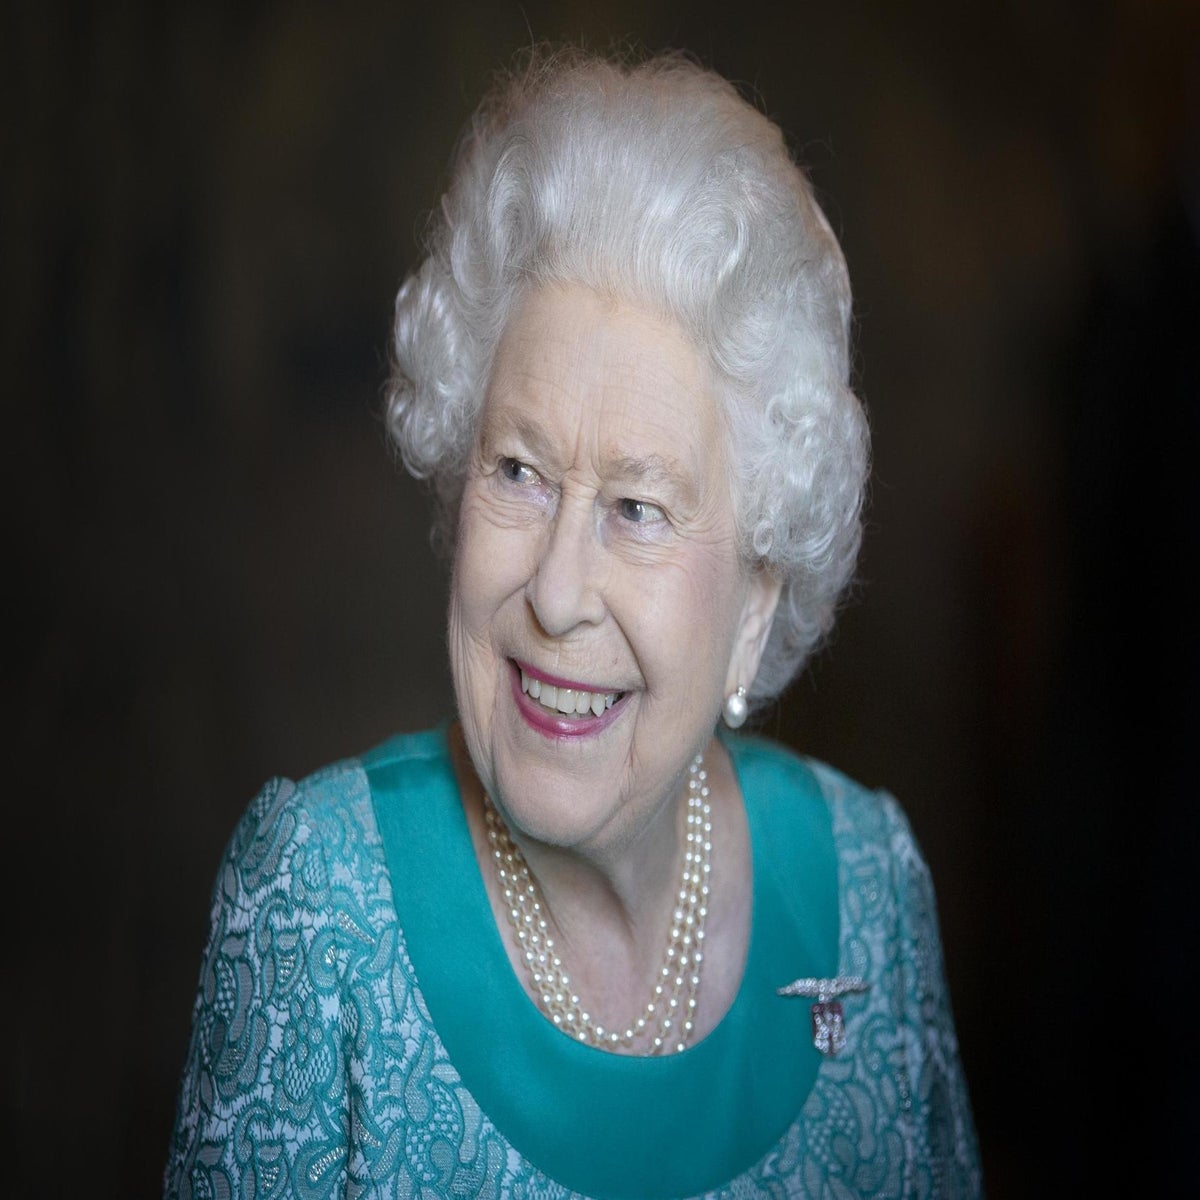 18 Record-Breaking, Controversial, and Weird Facts About the Queen